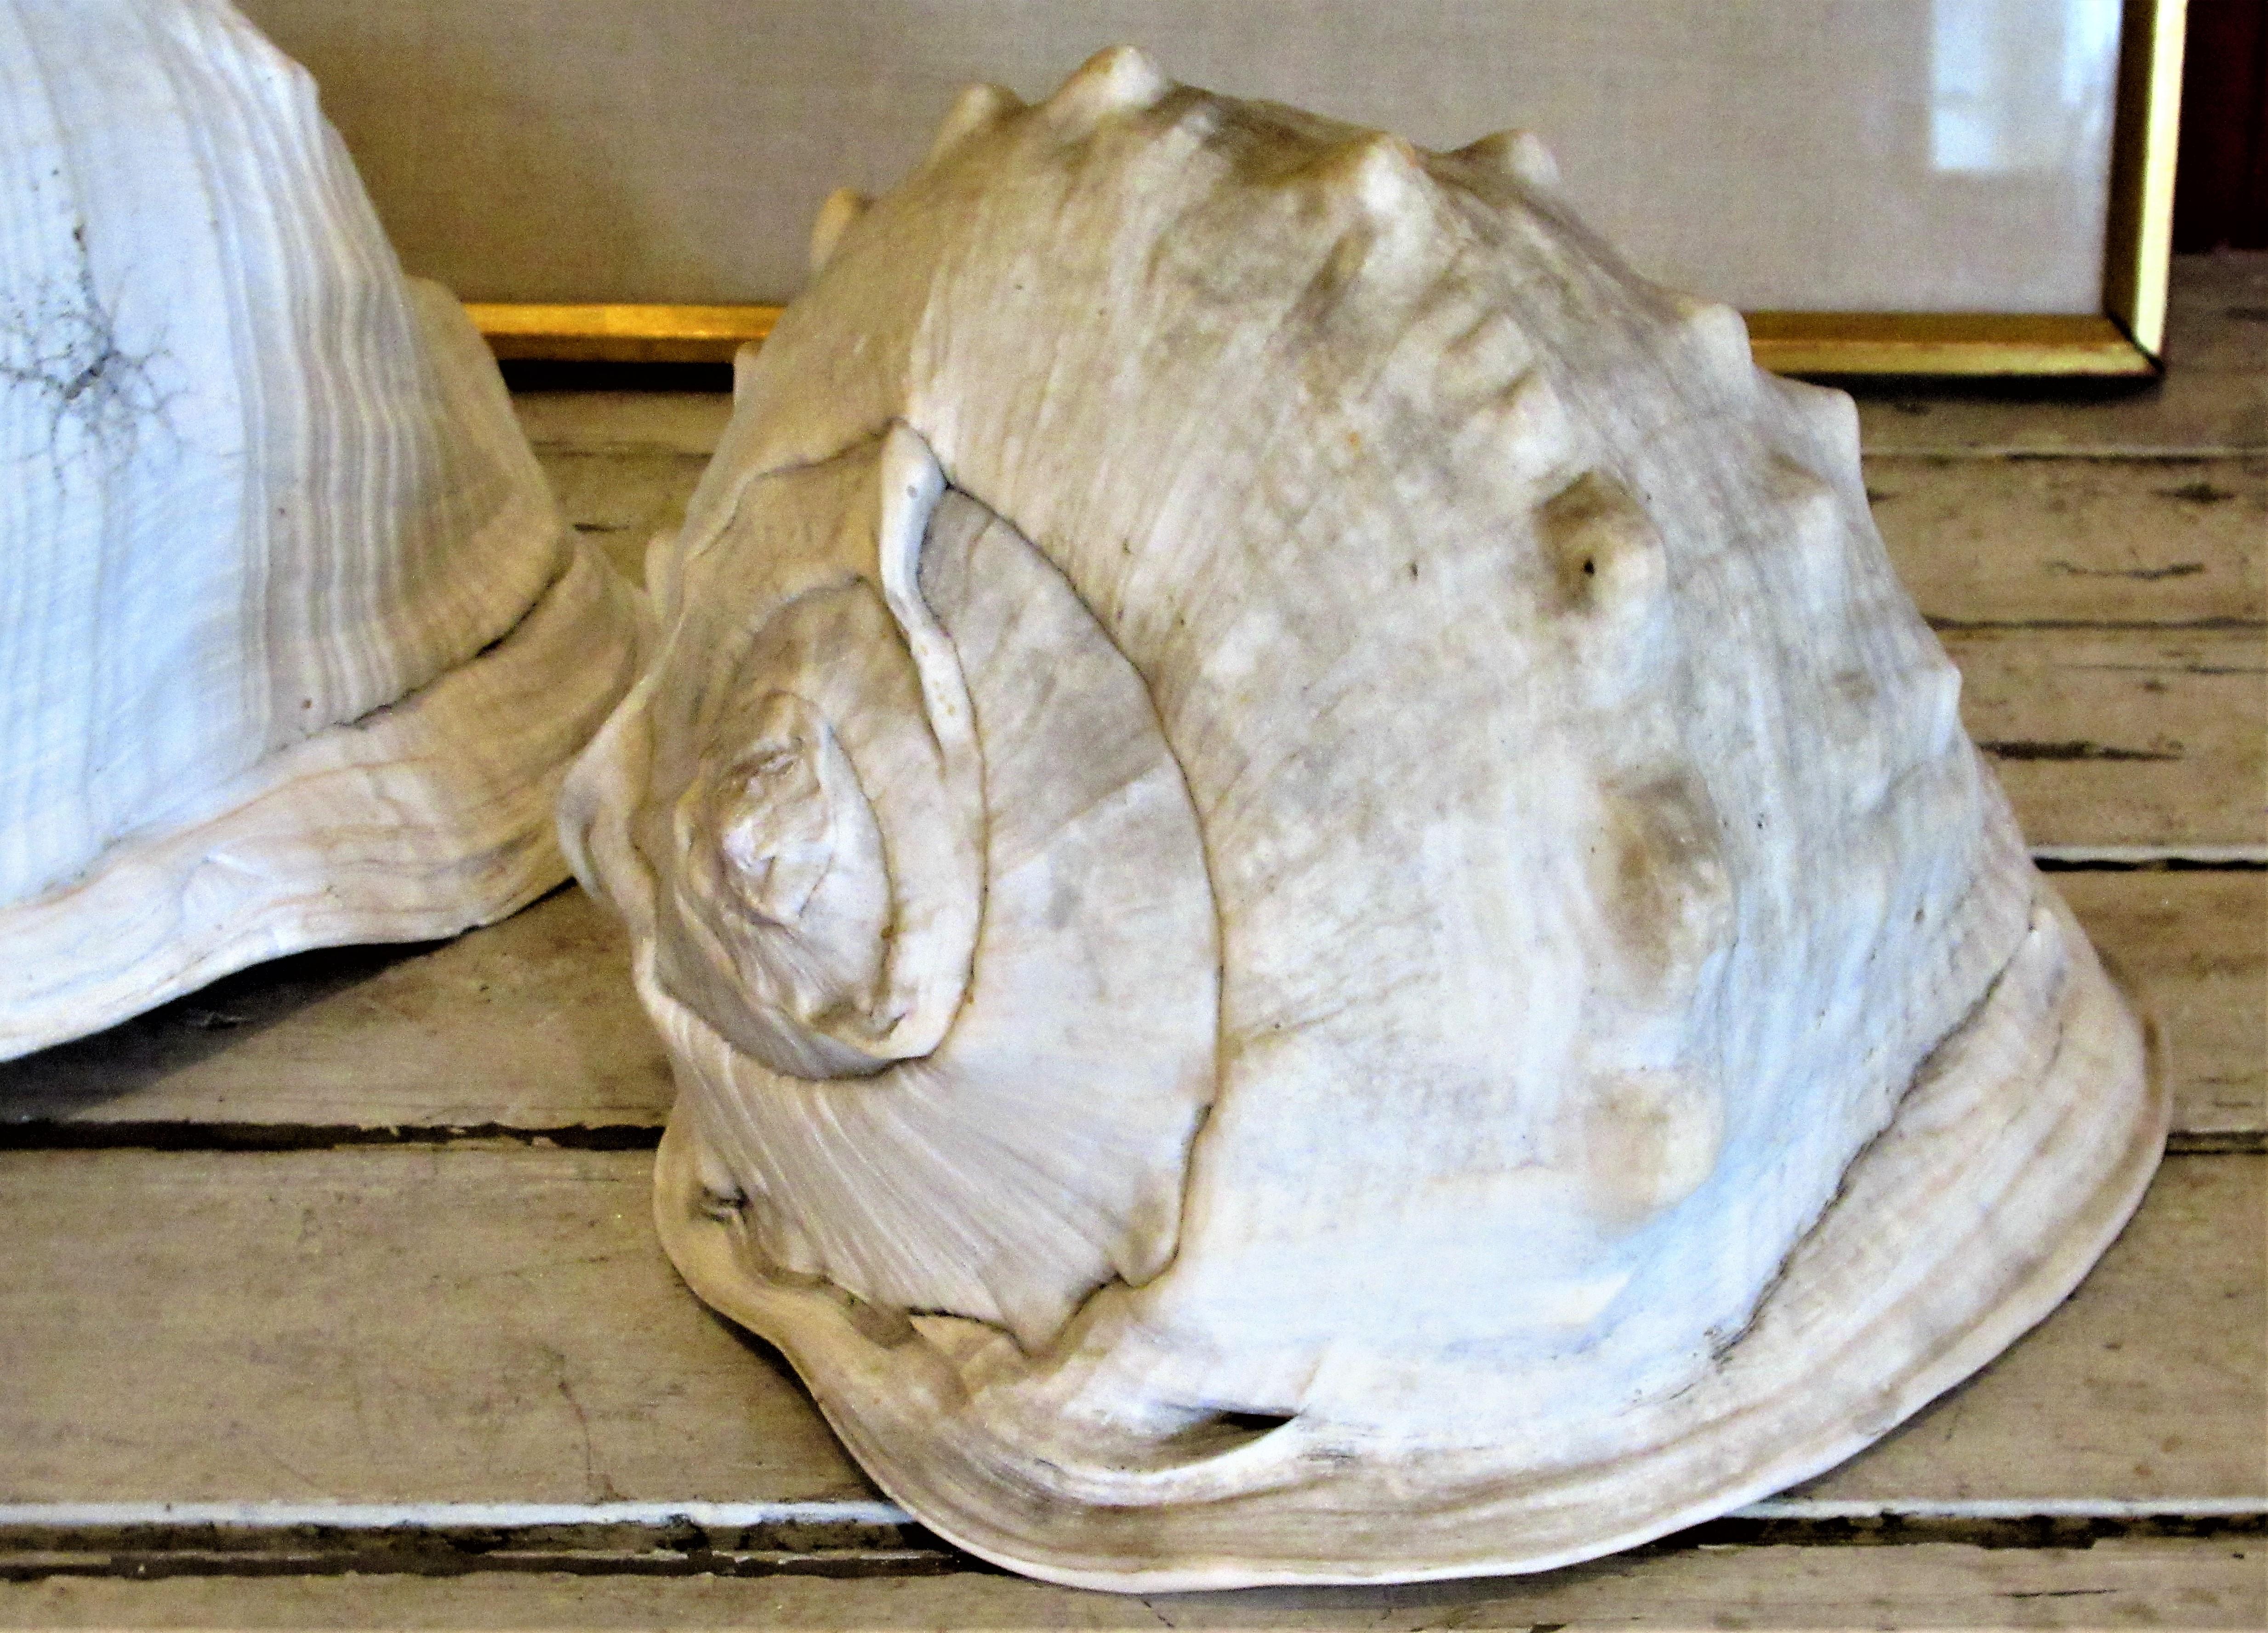  Old Queen Helmet Conch Shell Specimens 1